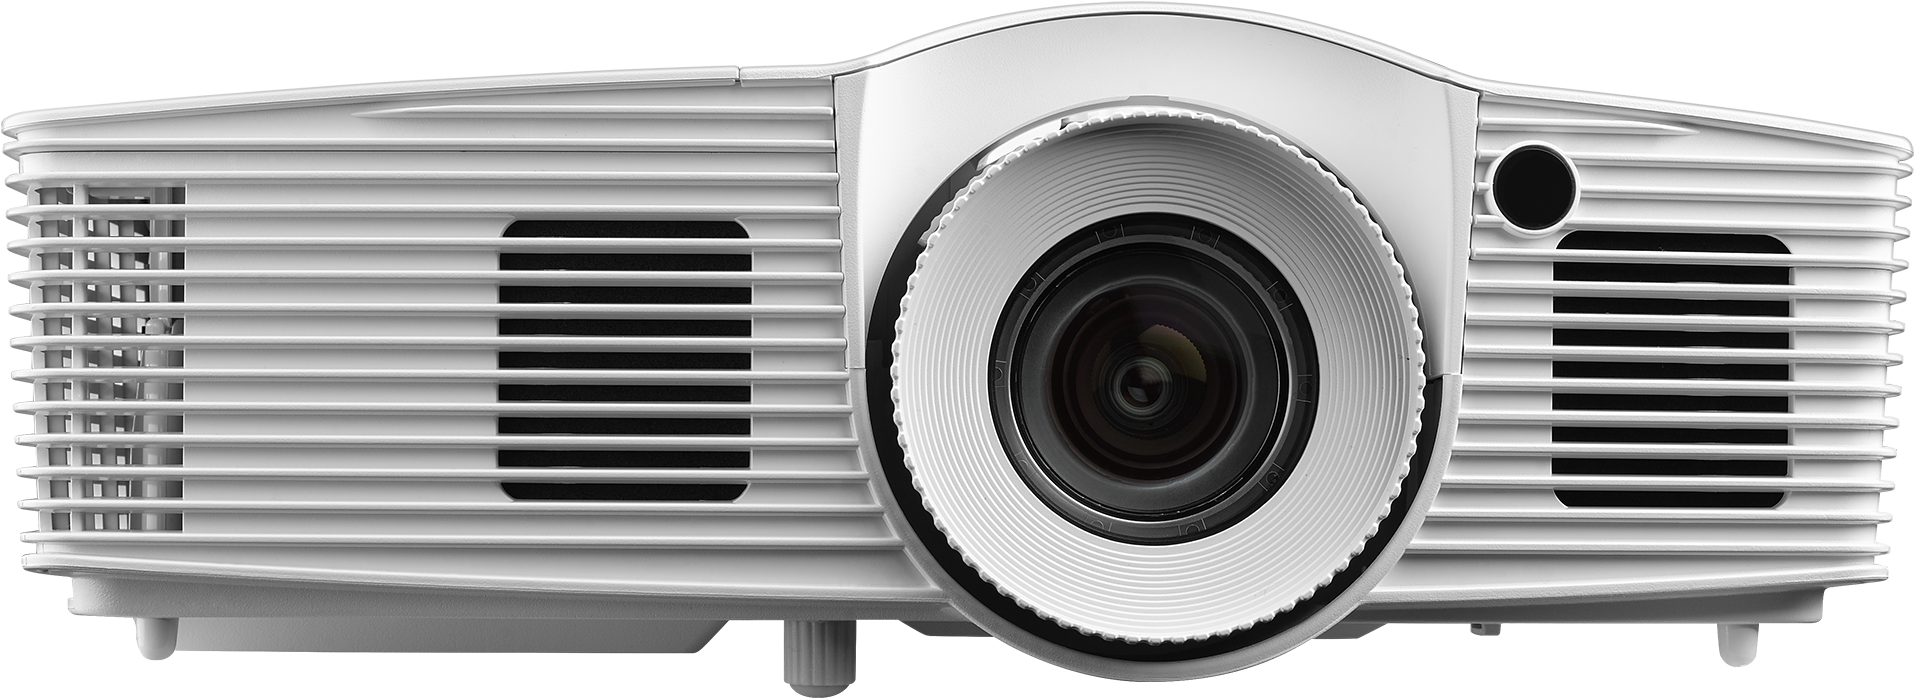 Download PNG image - Home Theater Projector PNG Transparent Image 